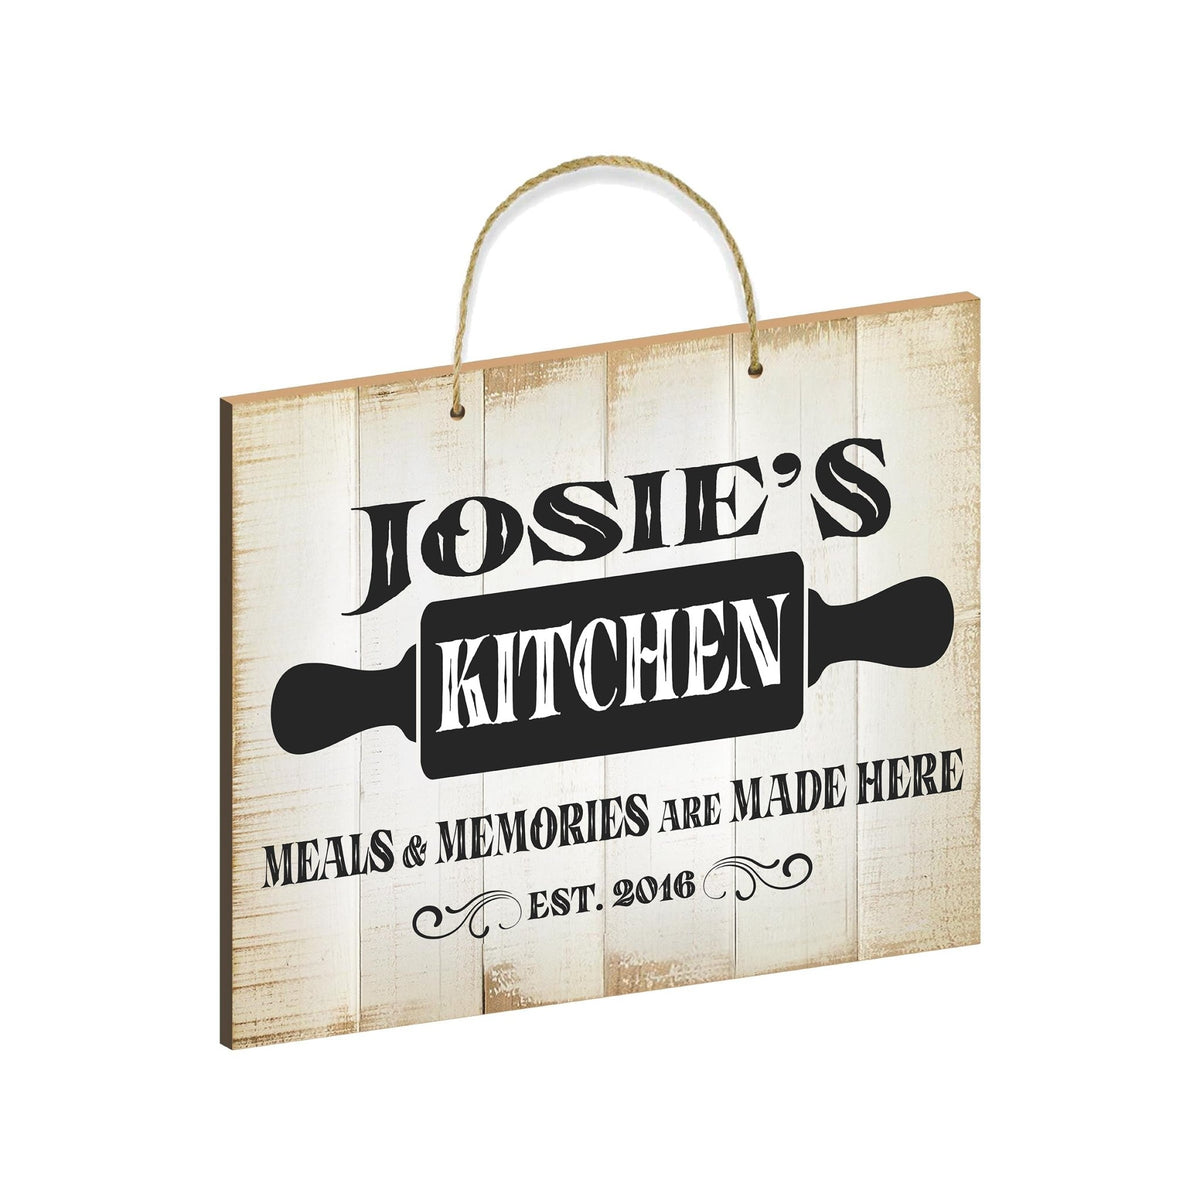 Rustic-Inspired Wooden Wall Hanging Rope Sign For Kitchen &amp; Home Décor - Meals &amp; Memories